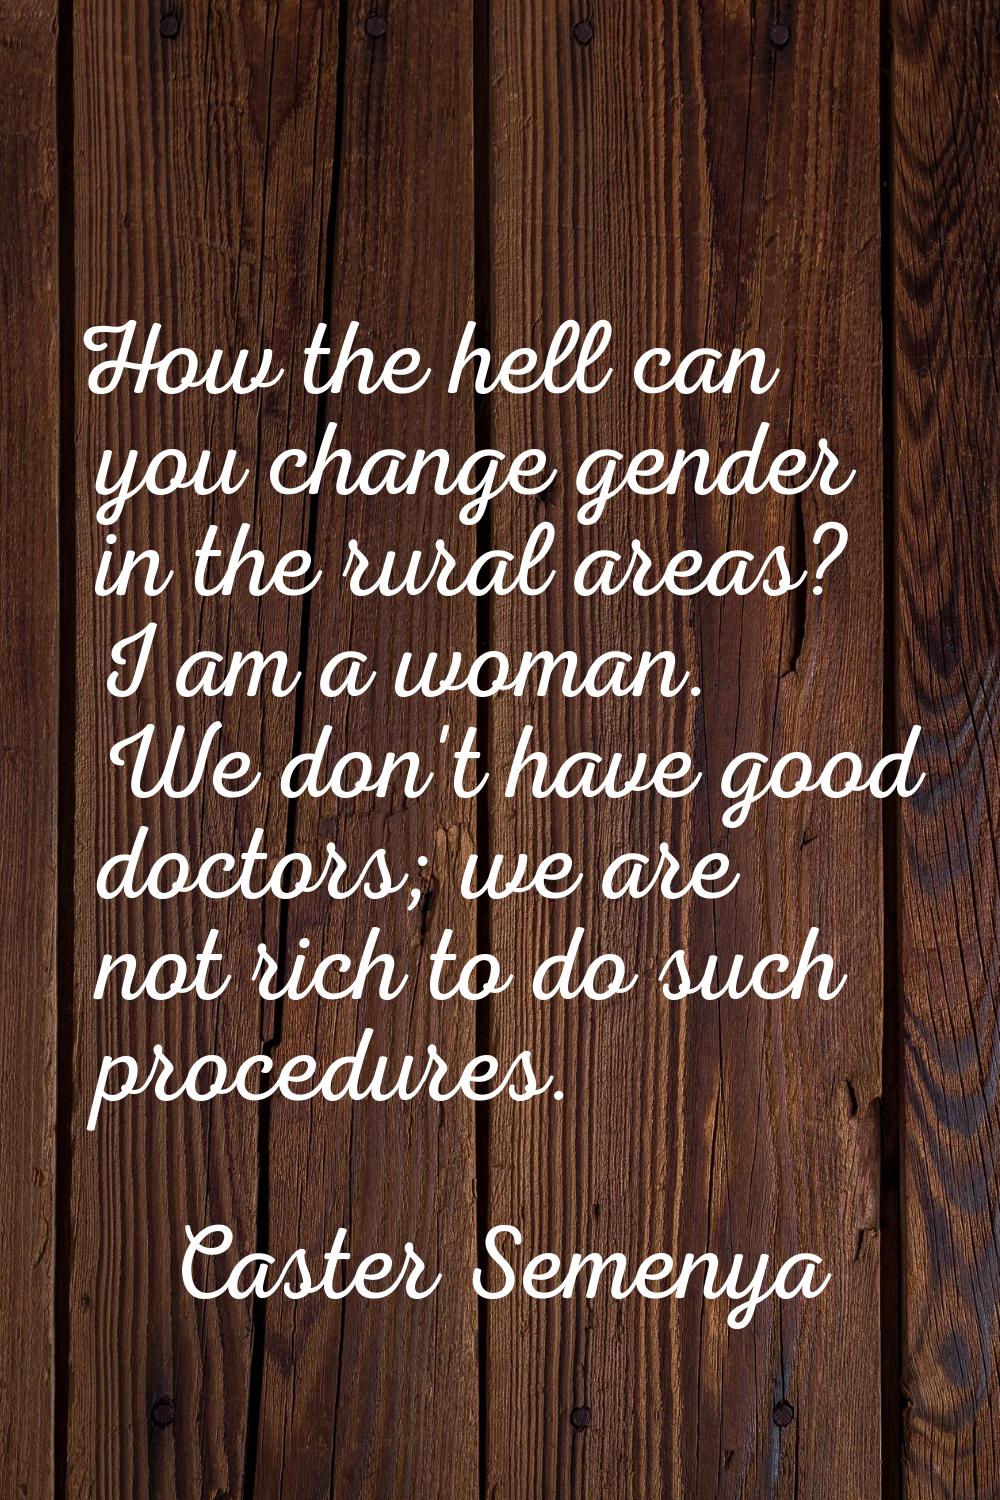 How the hell can you change gender in the rural areas? I am a woman. We don't have good doctors; we